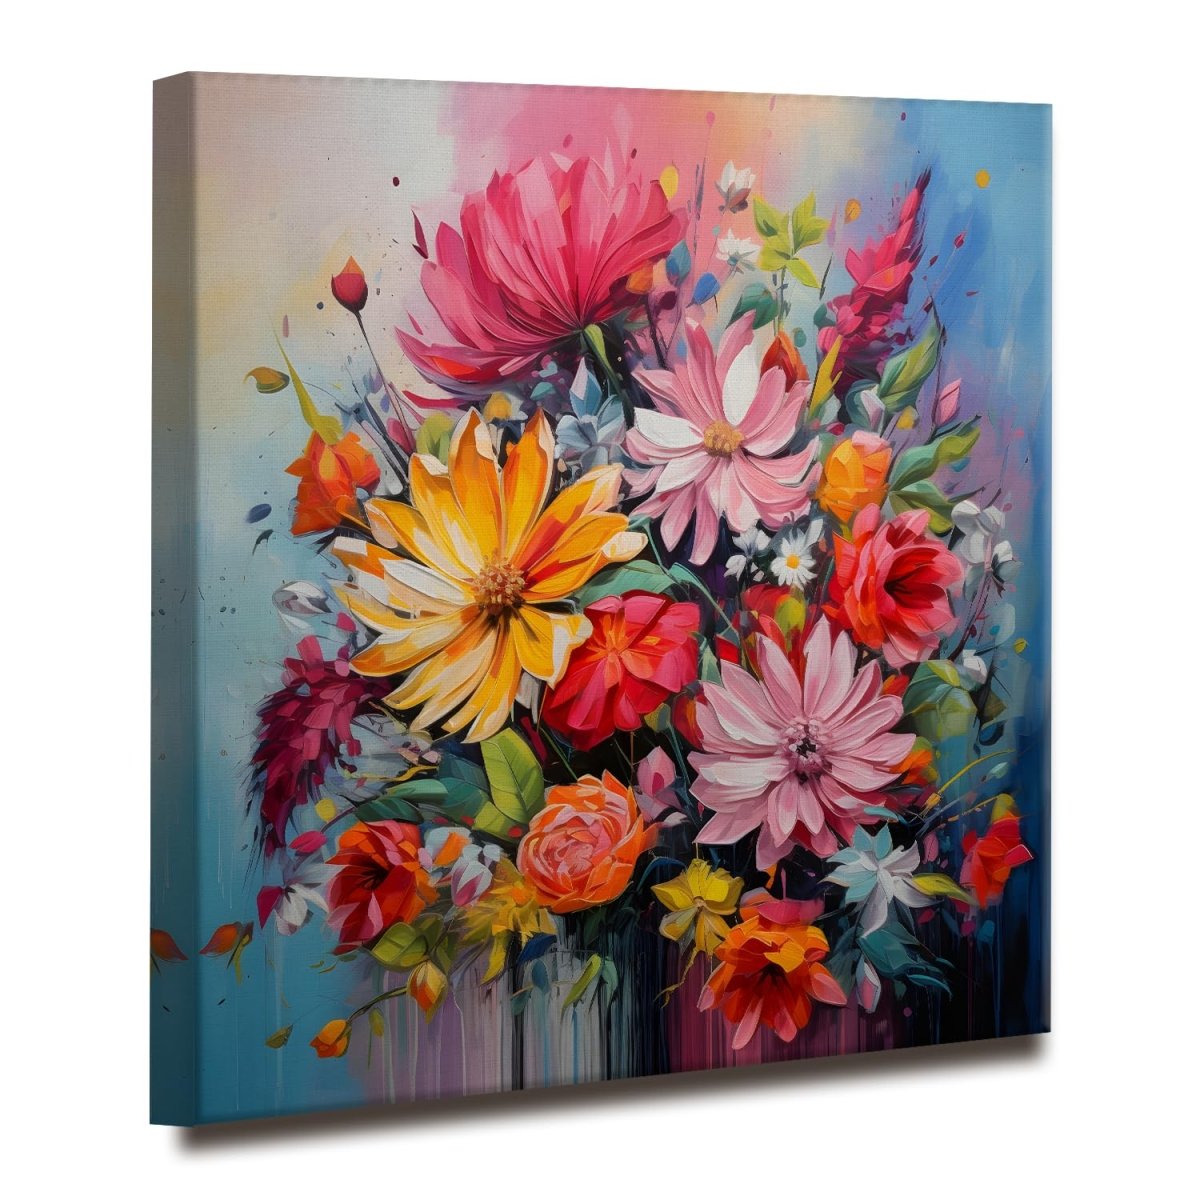 The Stardust Symphony Floral Canvas Wall Art (36 x 36 Inches)